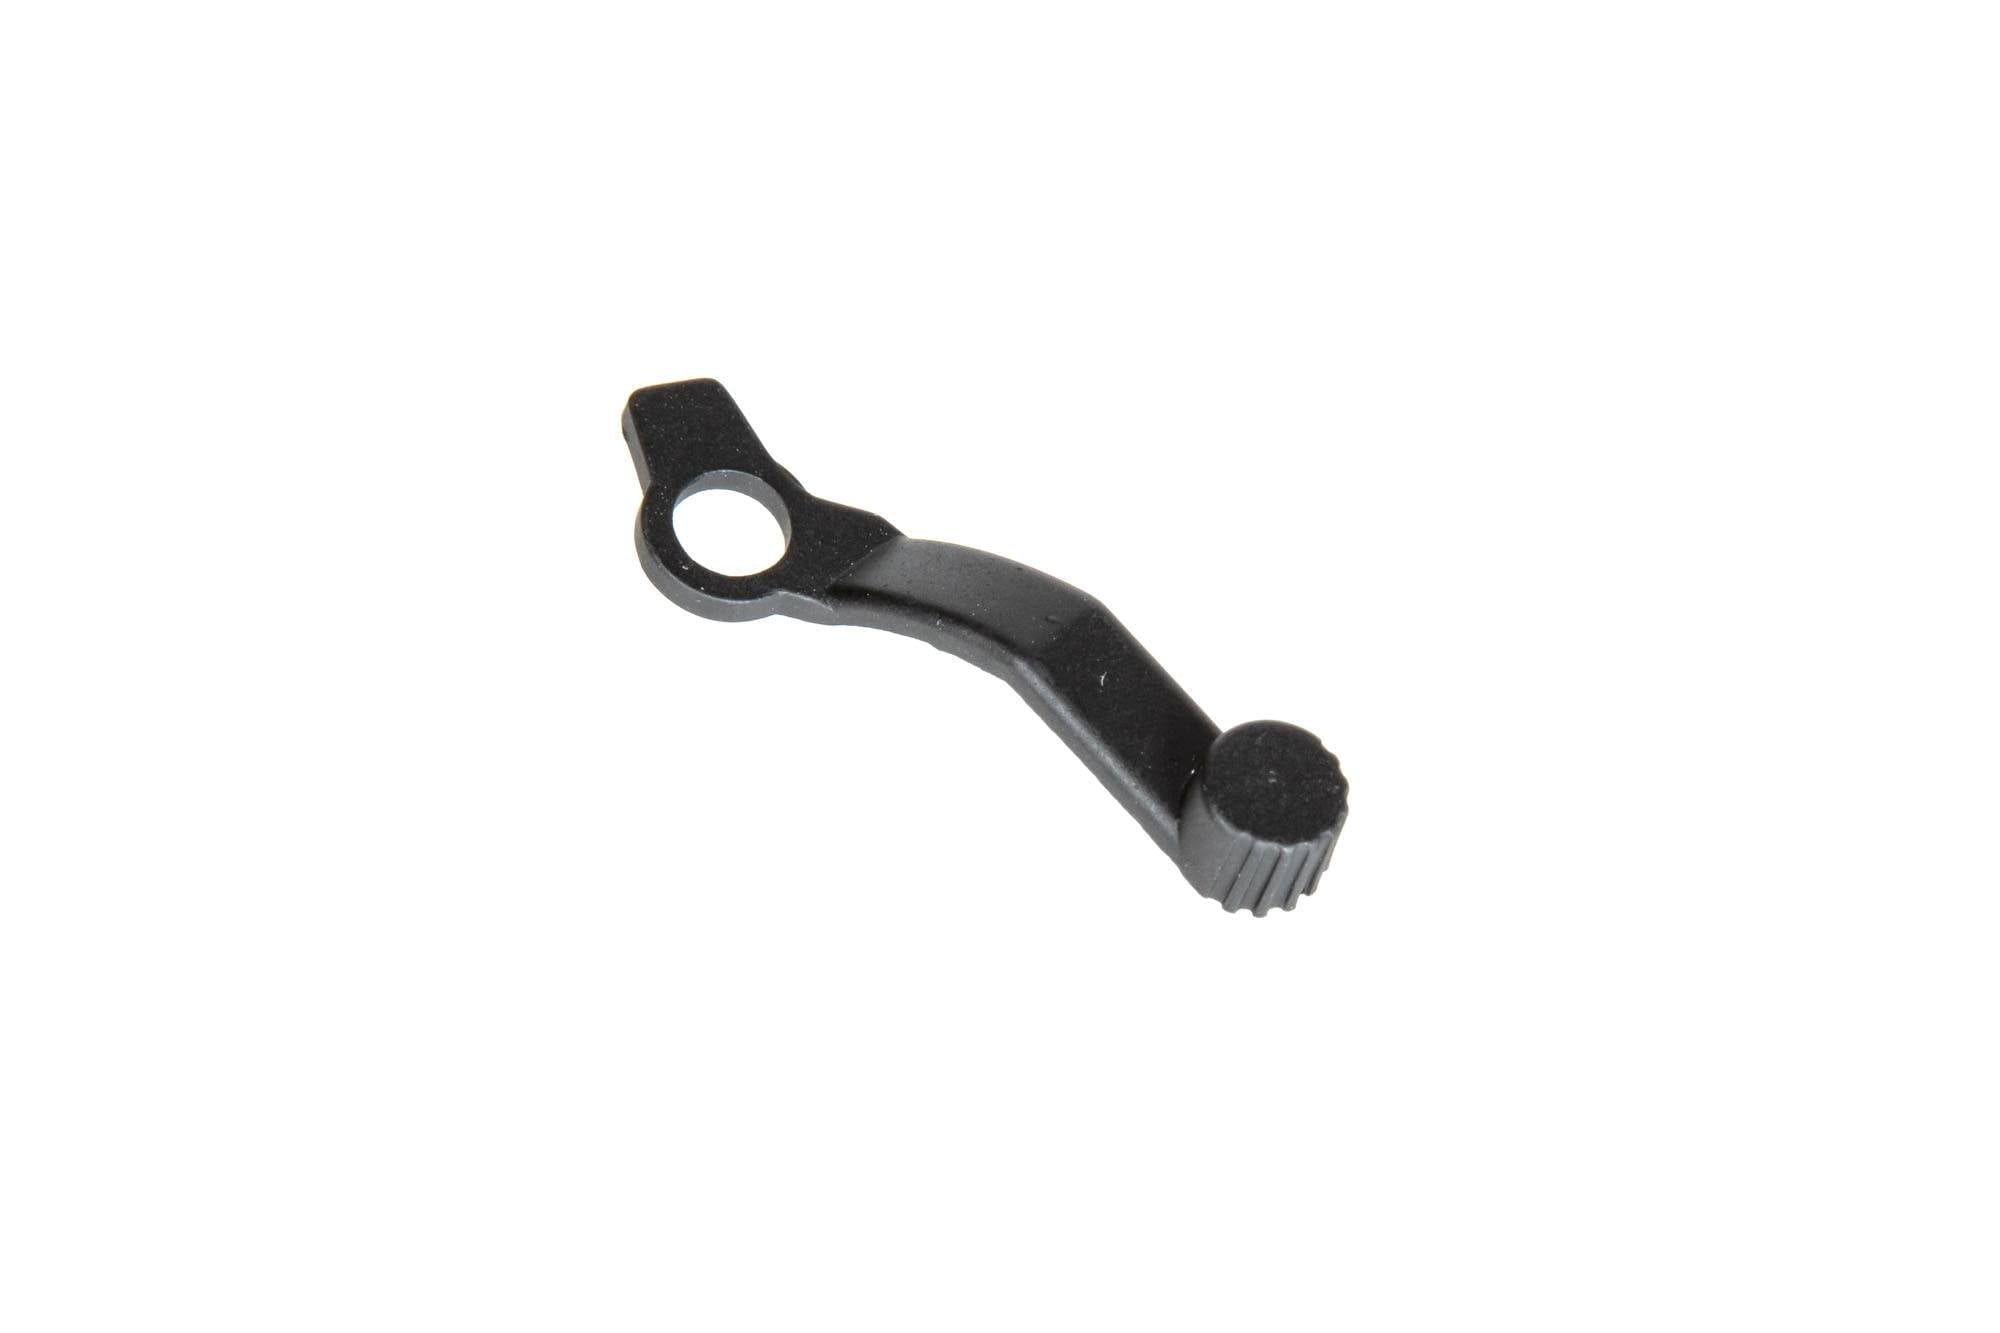 Safety lever for SA-S02/S03 / VSR replicas